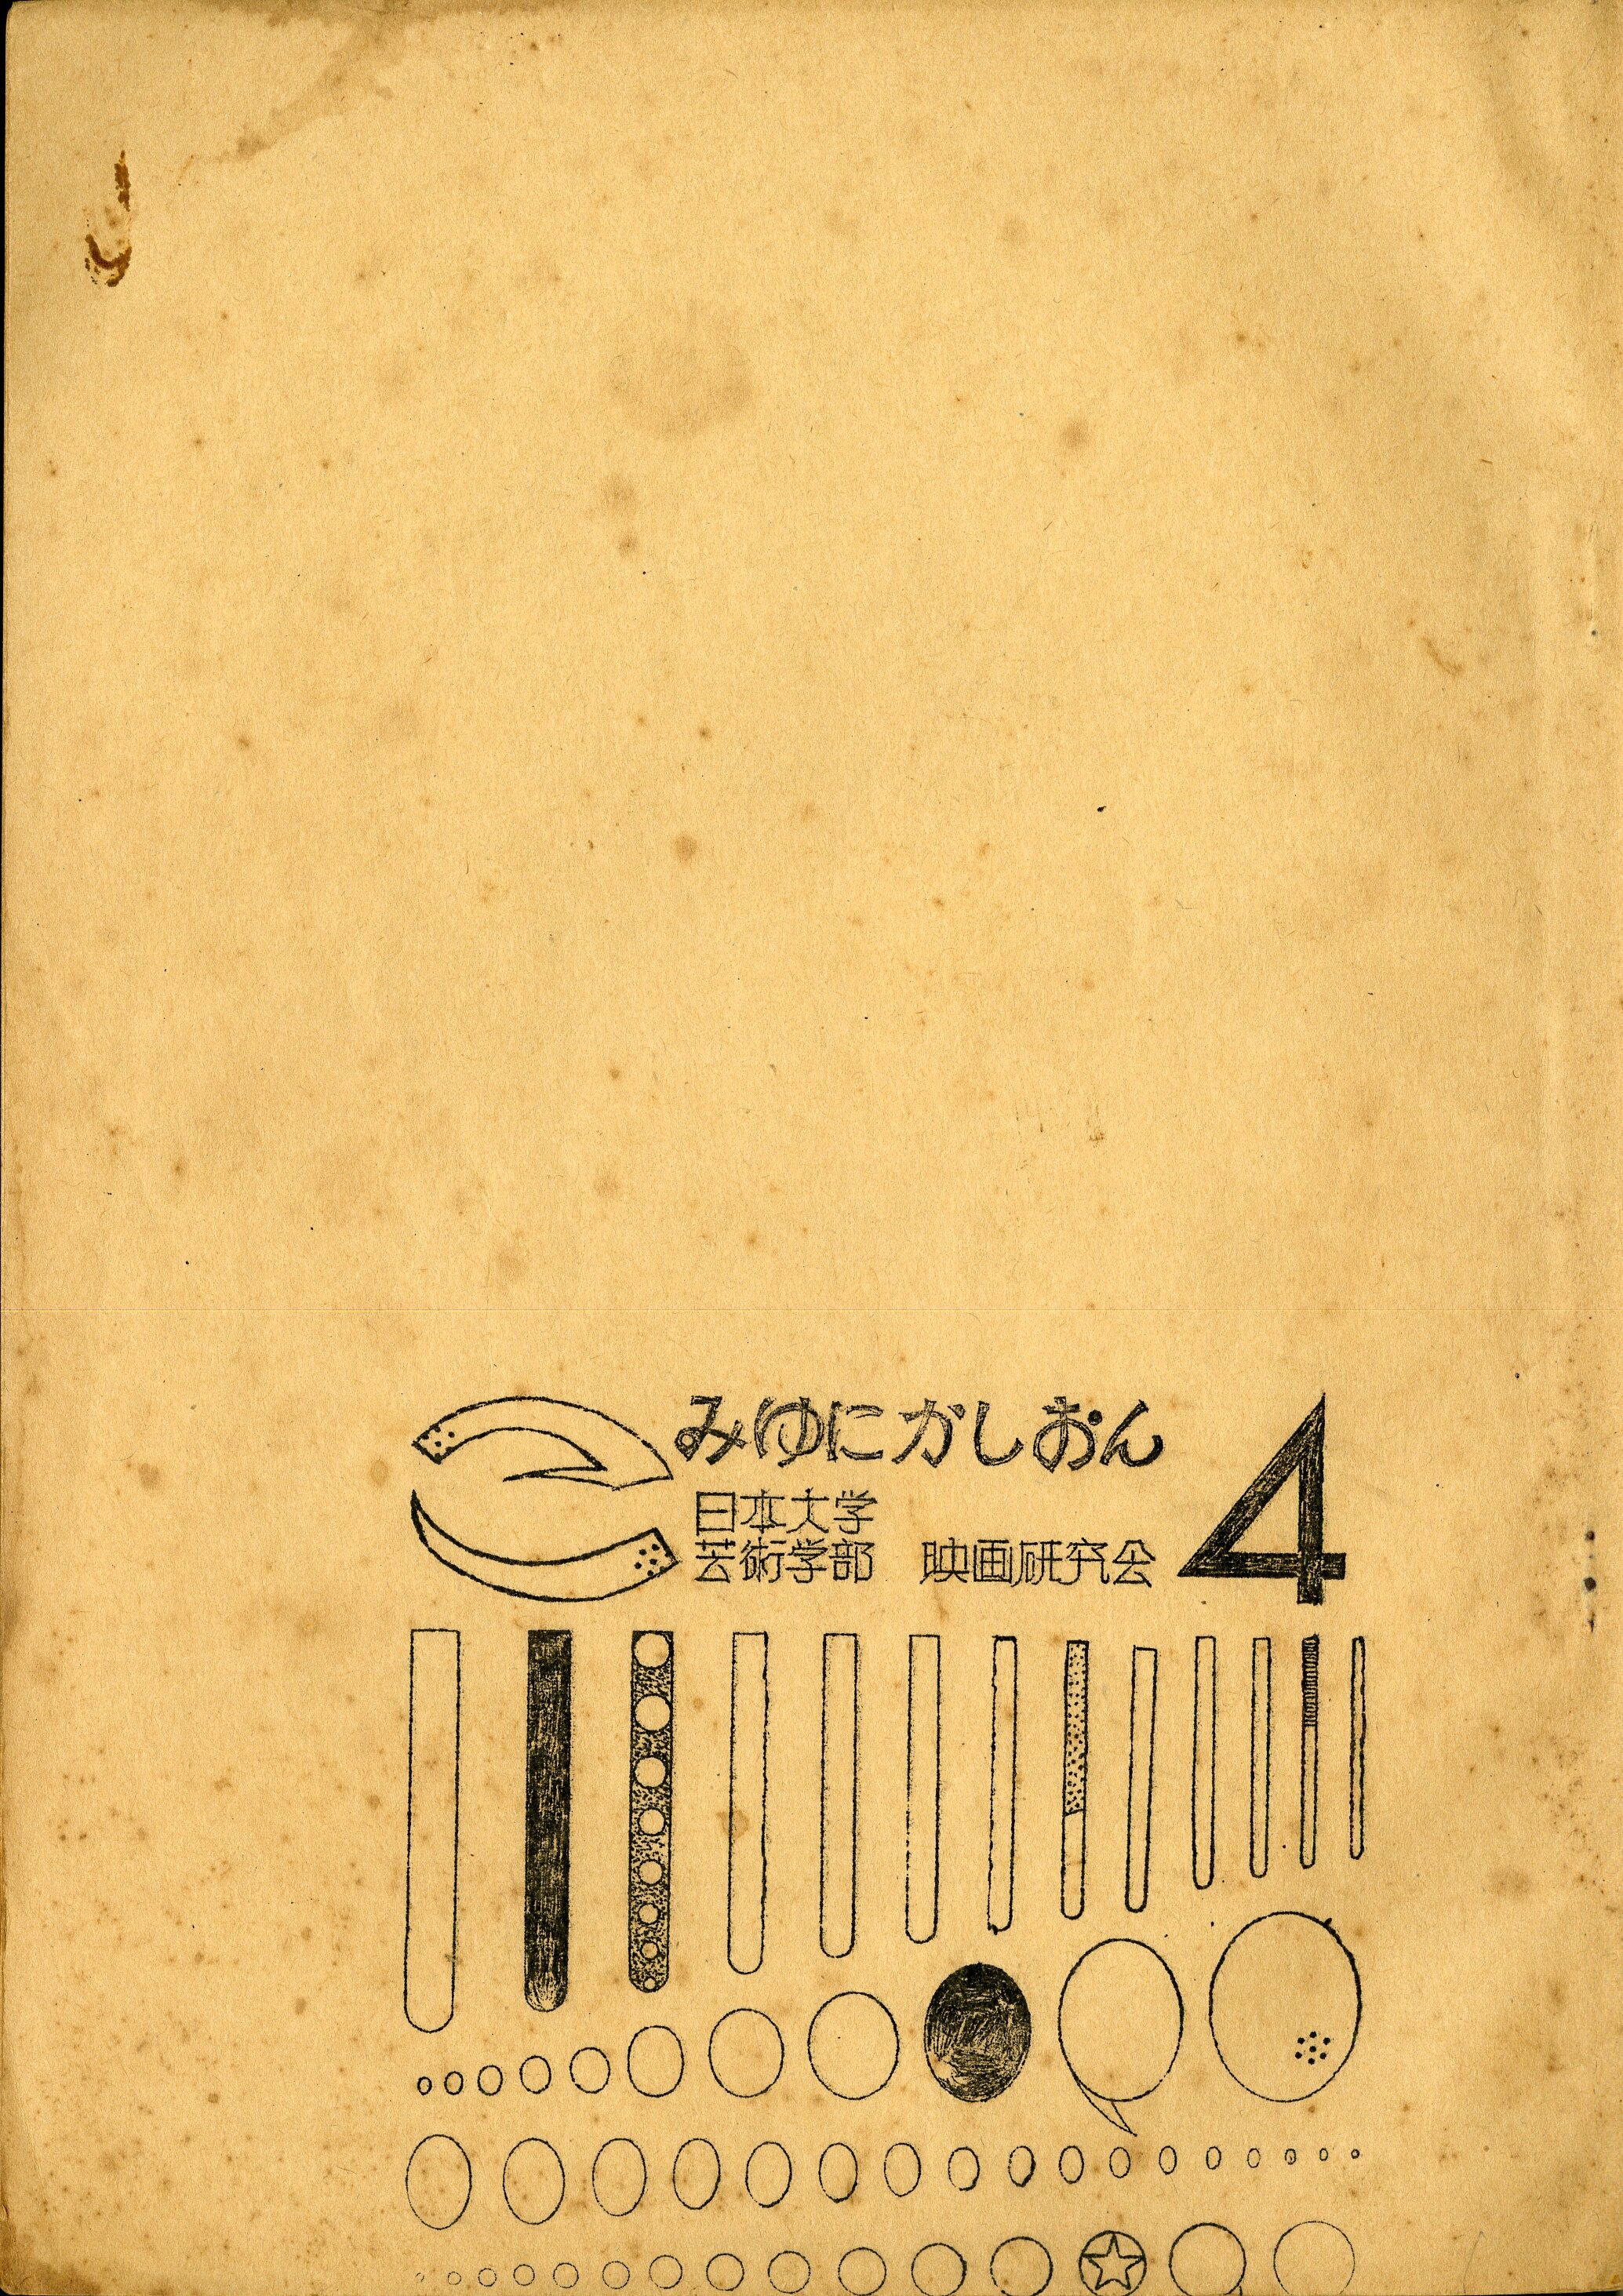  Front cover of journal published by Nichidai Eiken, Communication, No. 4, 1961  Scanned reference material. Private Collection 